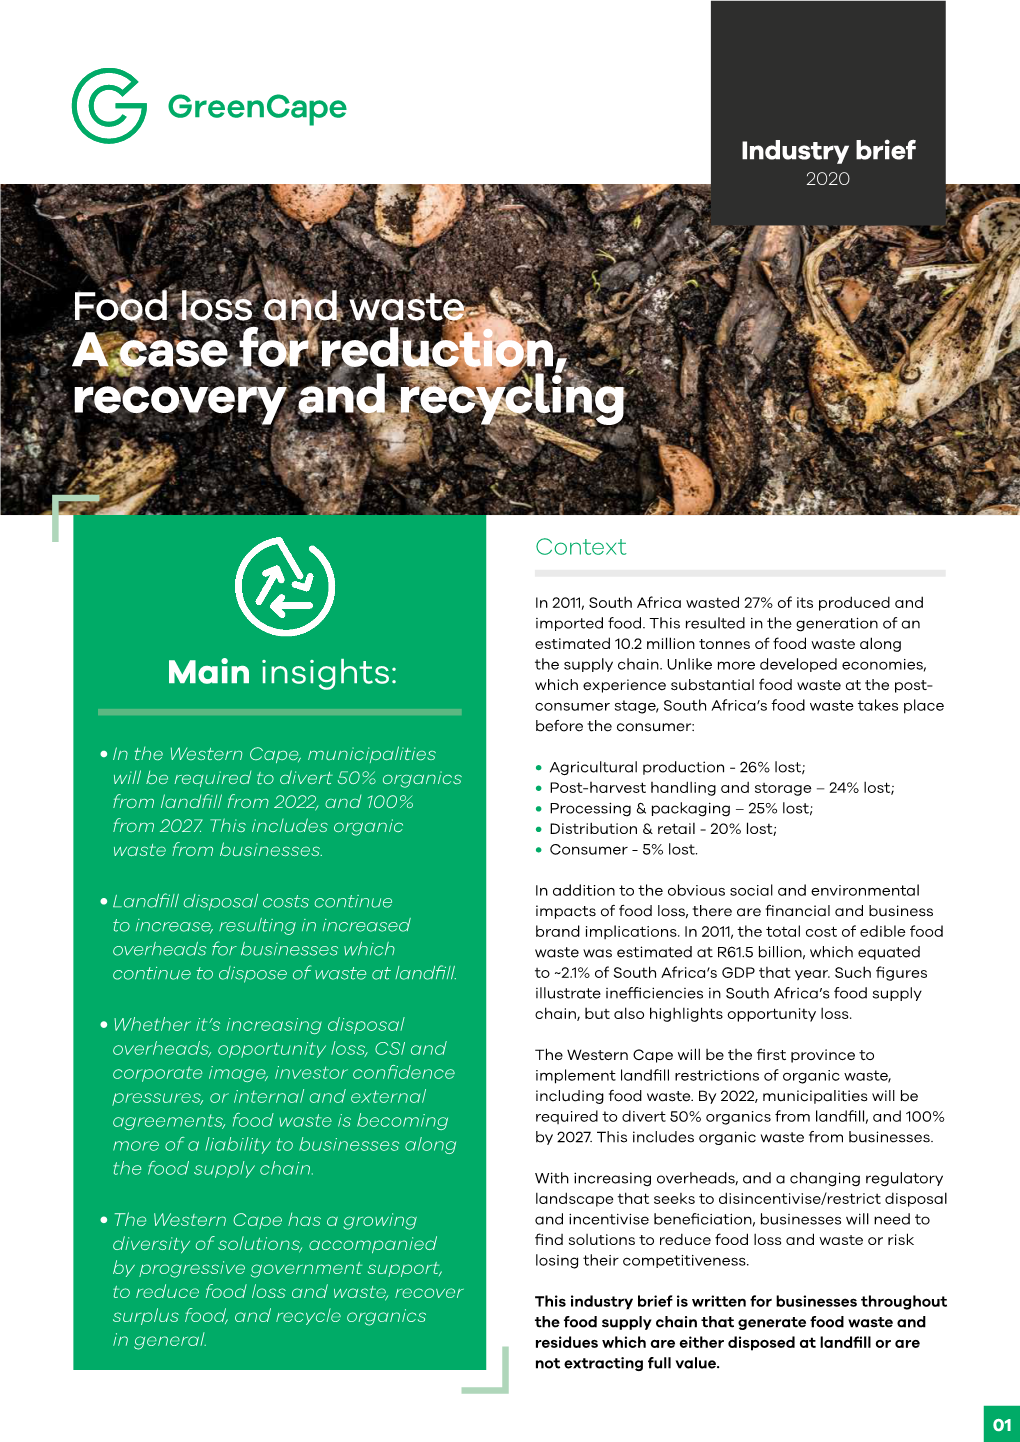 A Case for Reduction, Recovery and Recycling